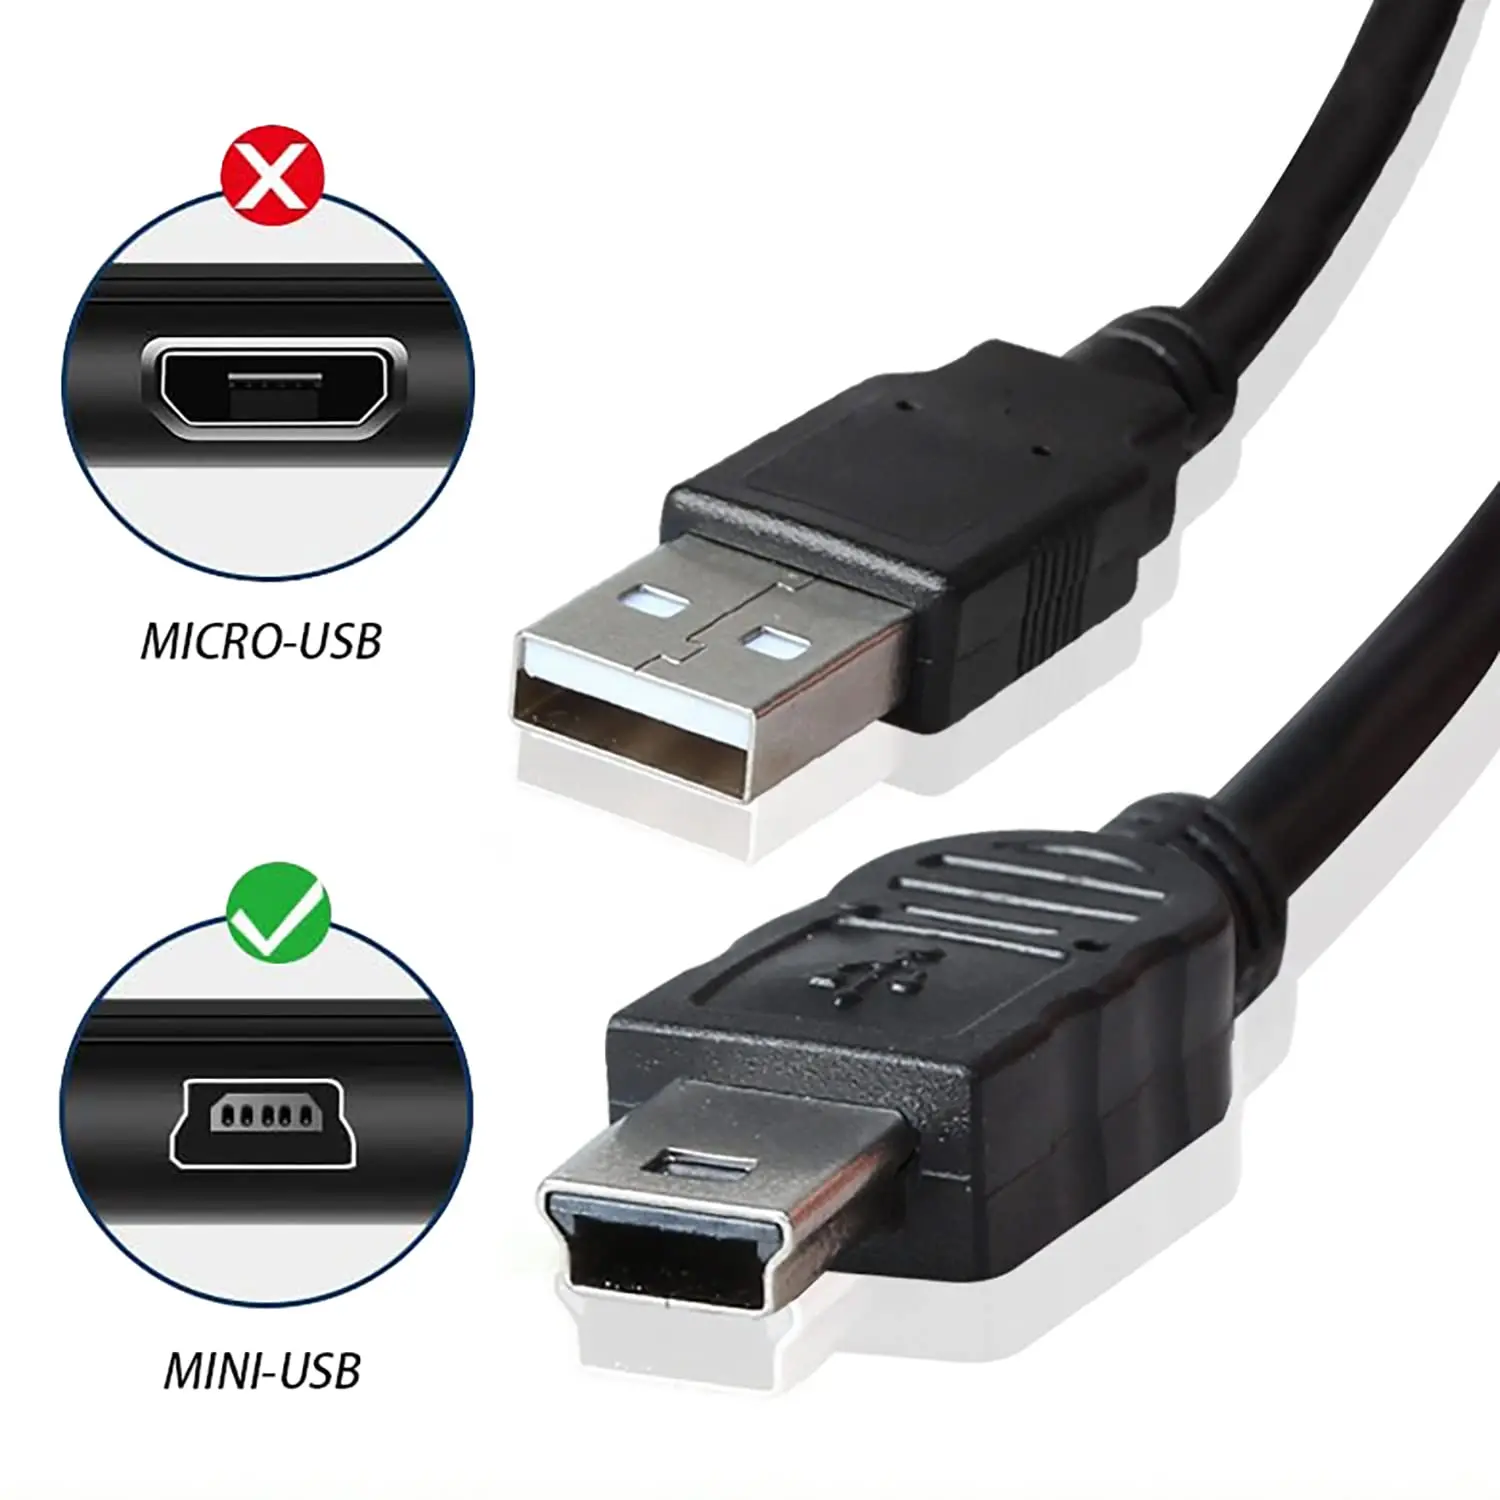 Mini USB 2.0 Cable 5Pin Mini USB to USB Fast Data Charger Cables for MP3 MP4 Player Car DVR GPS Digital Camera HD Smart TV1/1.5m